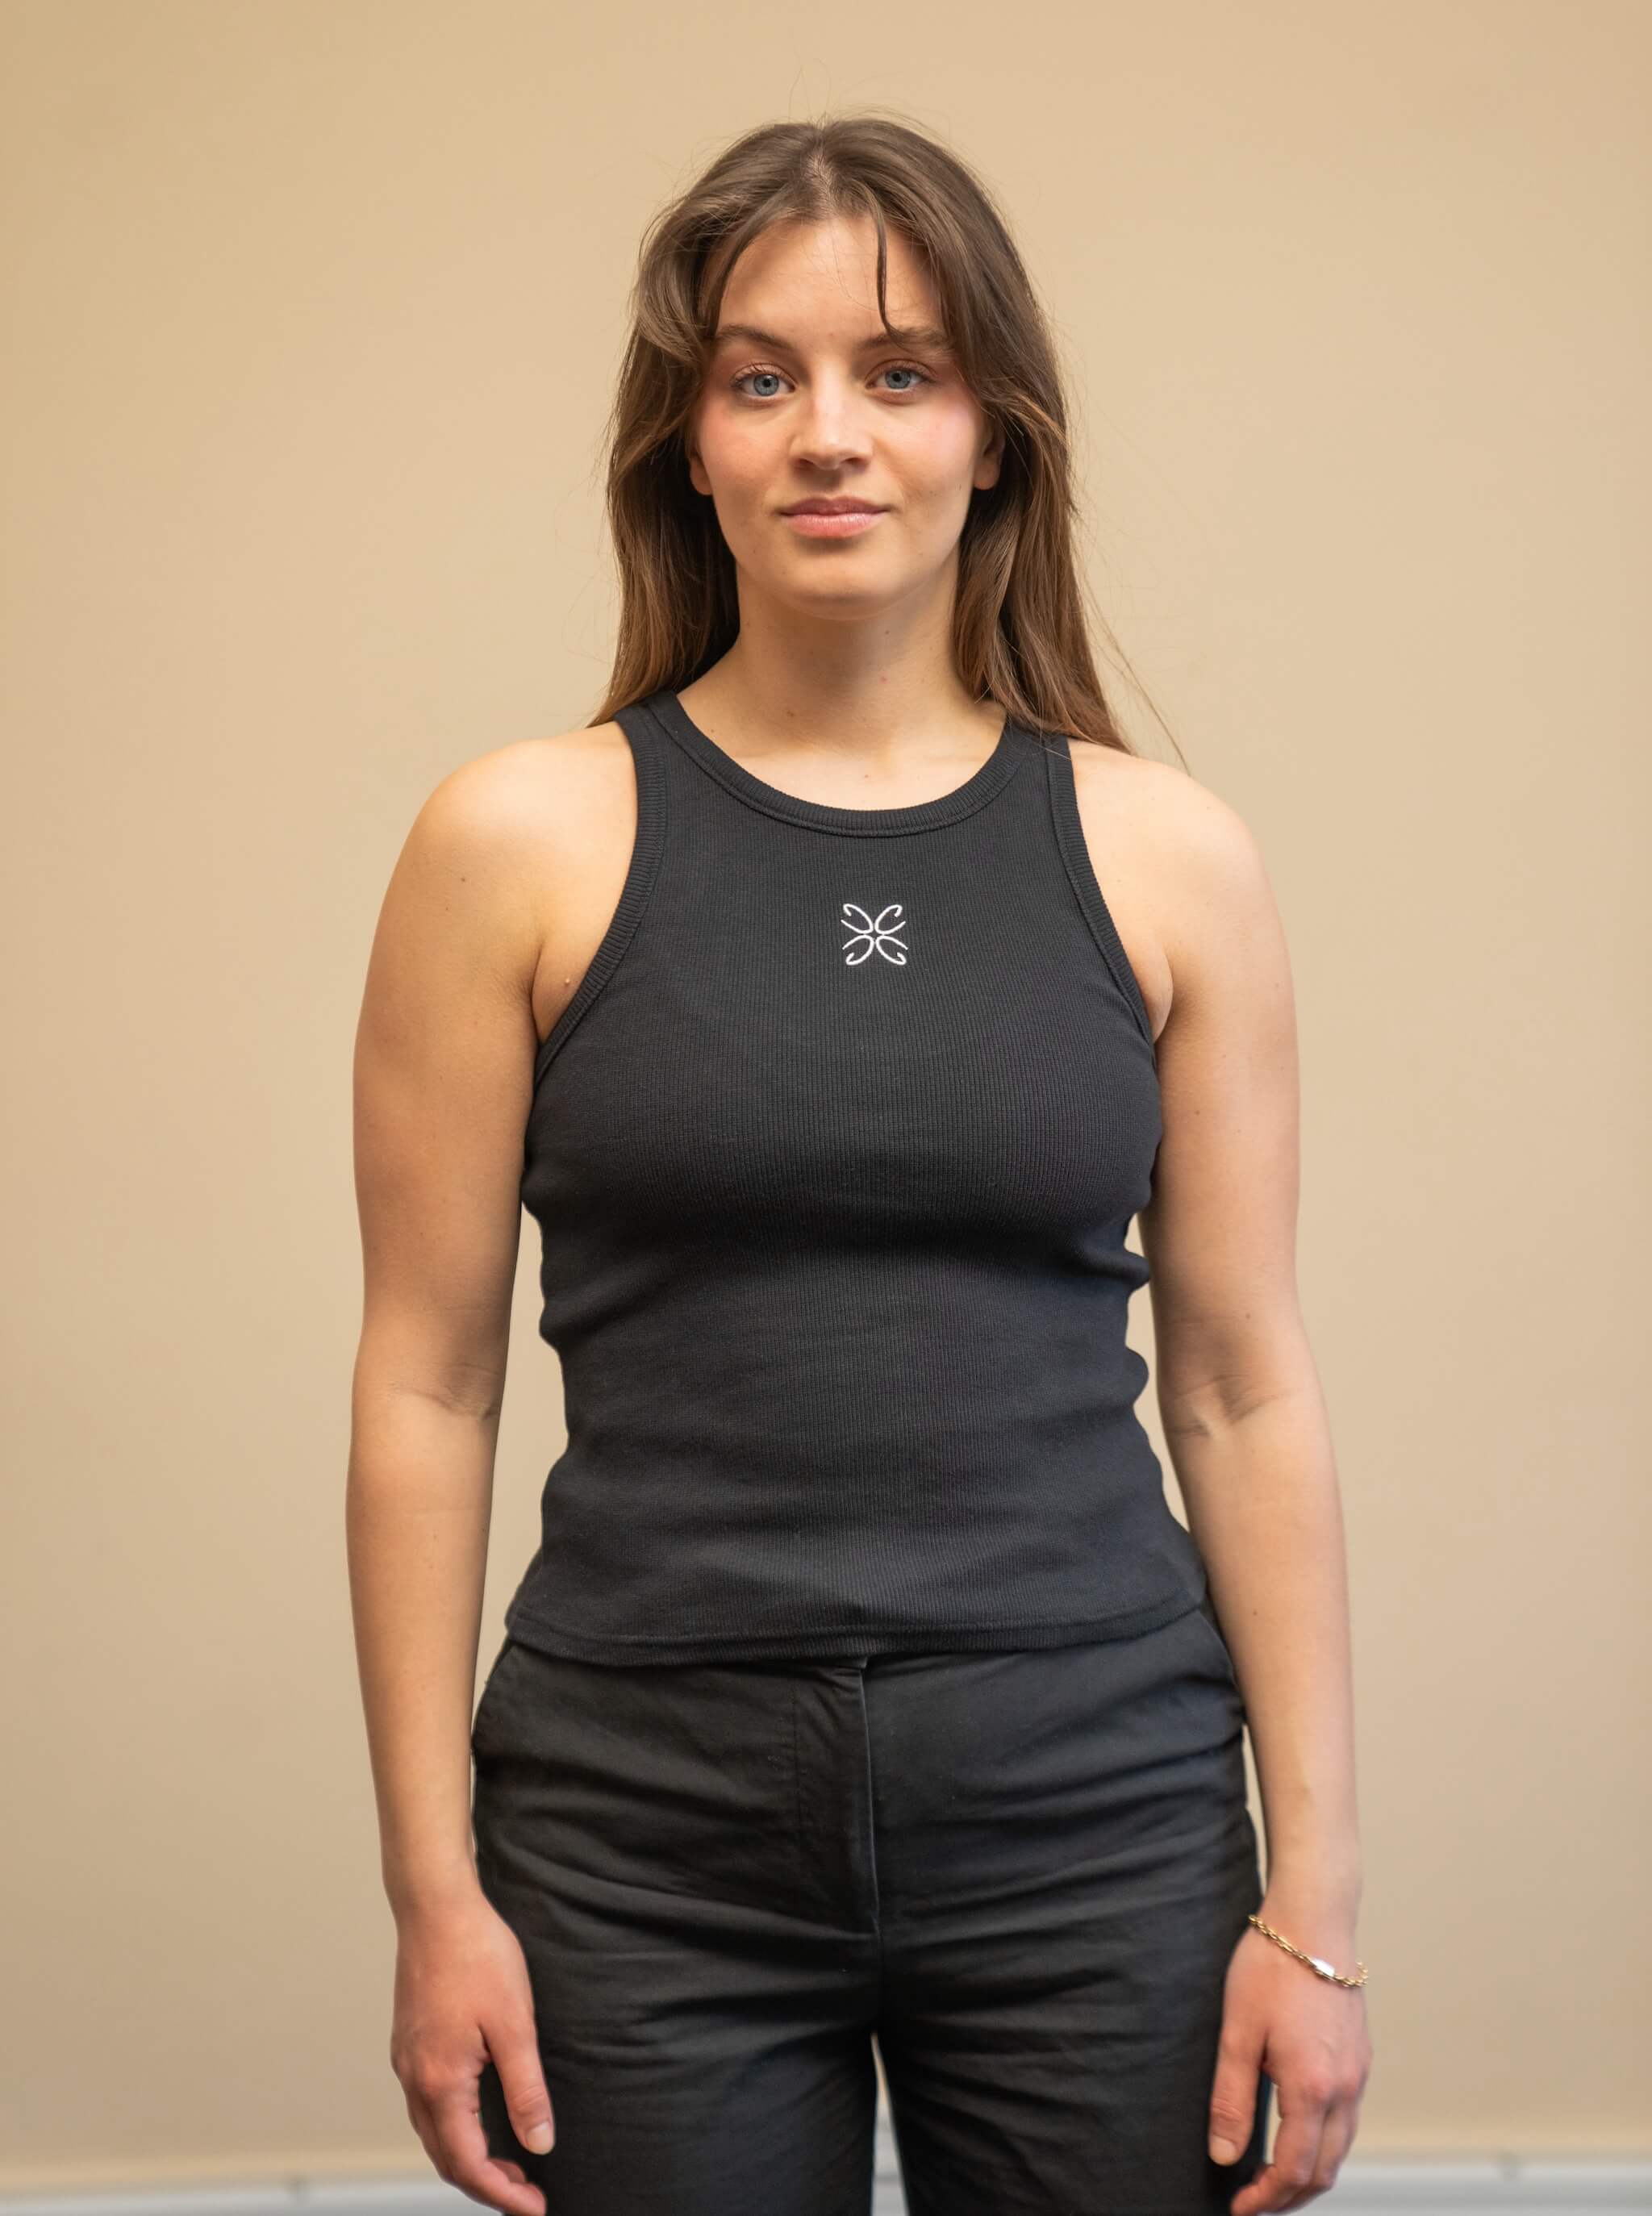 Woman wearing a black tank top from Cyme Copenhagen's spring/summer collection. The tank top features a simple design with a white logo in the center. The model stands against a neutral background, emphasizing the minimalist and stylish appeal of the garment.